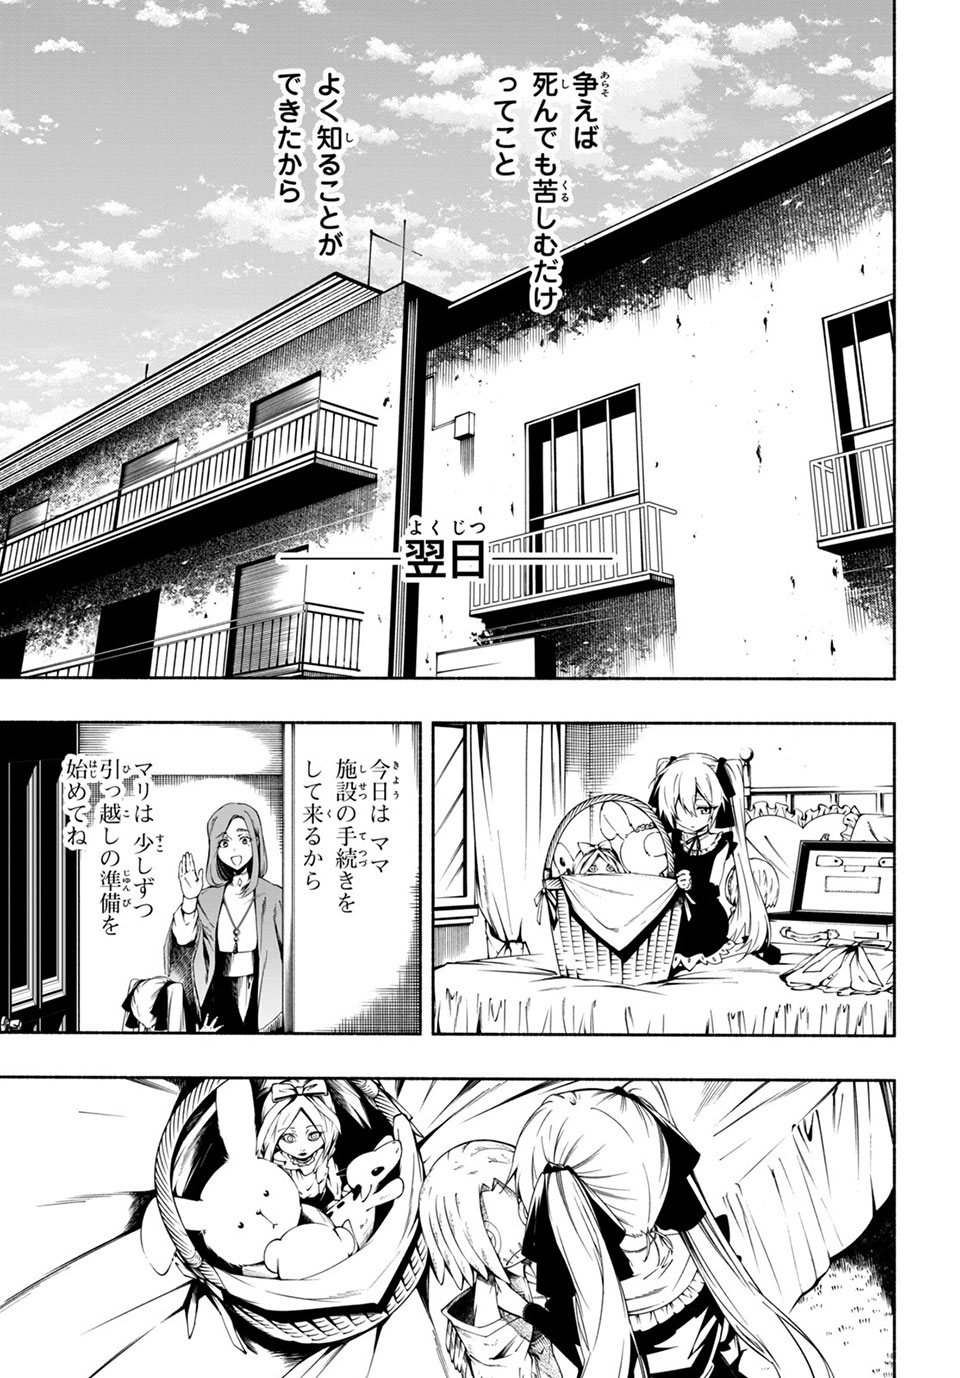 Shaman King: and a garden 第12.2話 - Page 6